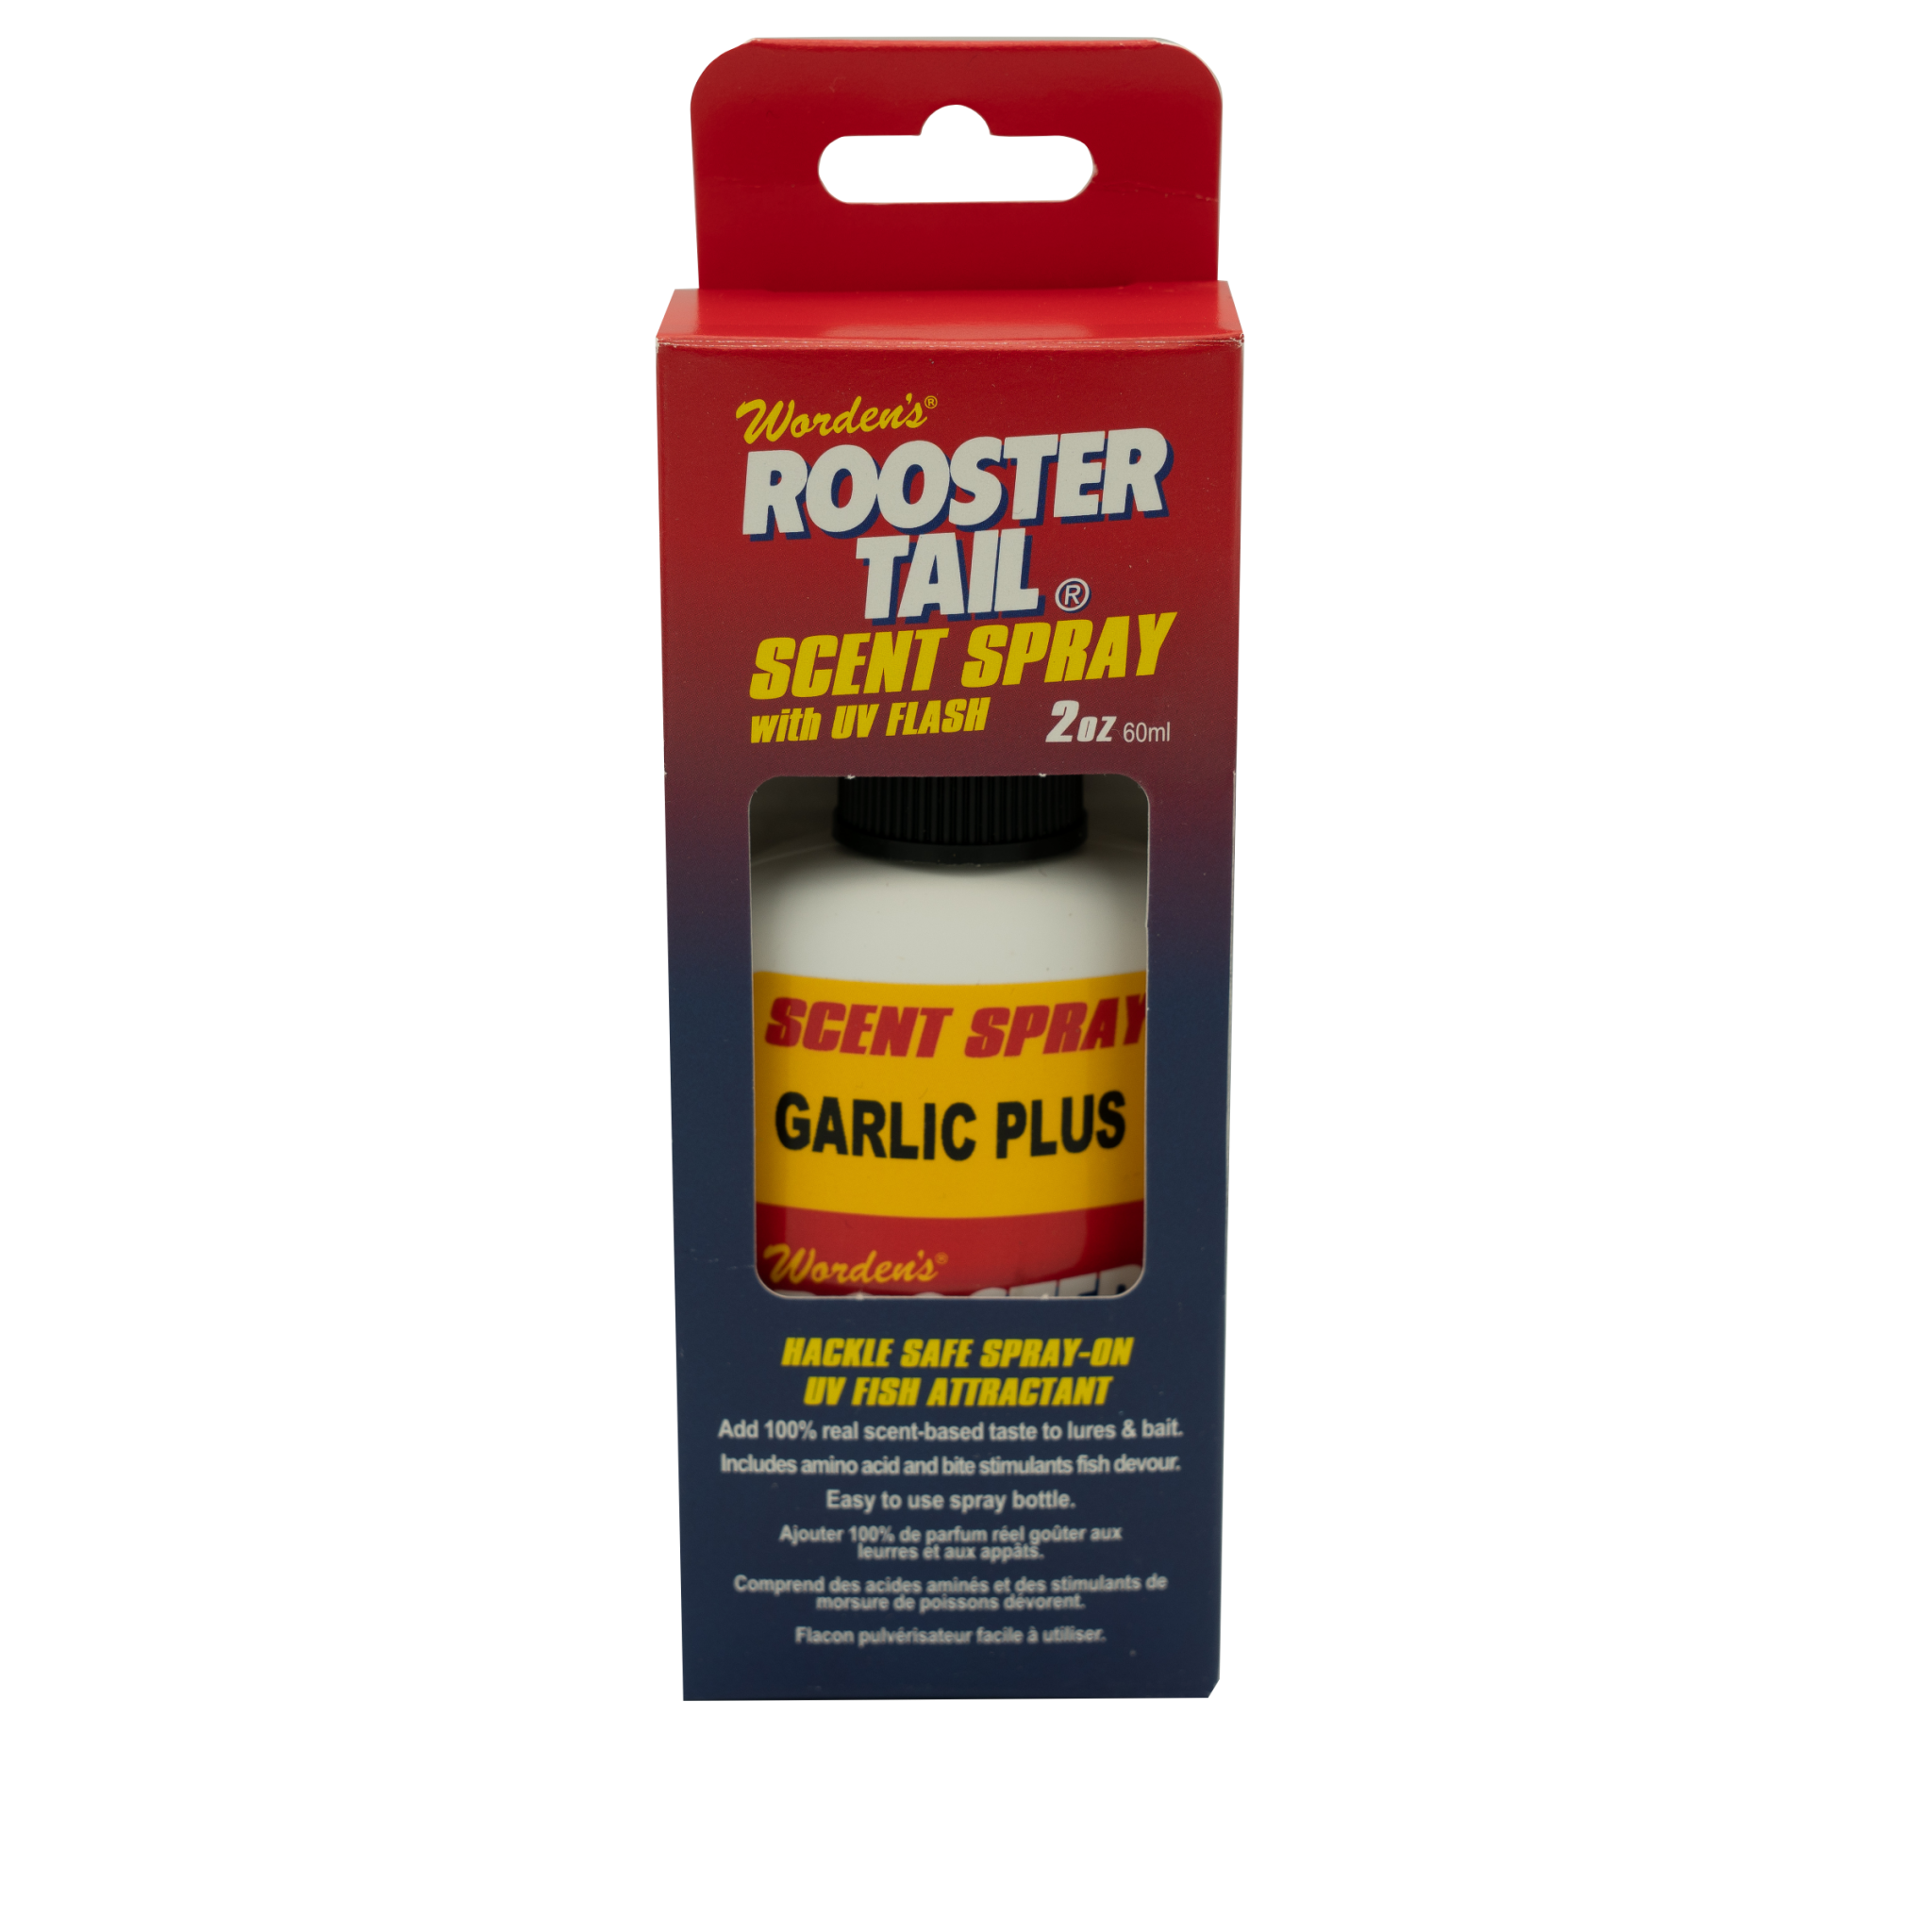 ROOSTER TAIL GARLIC PLUS – Pro-Cure, Inc